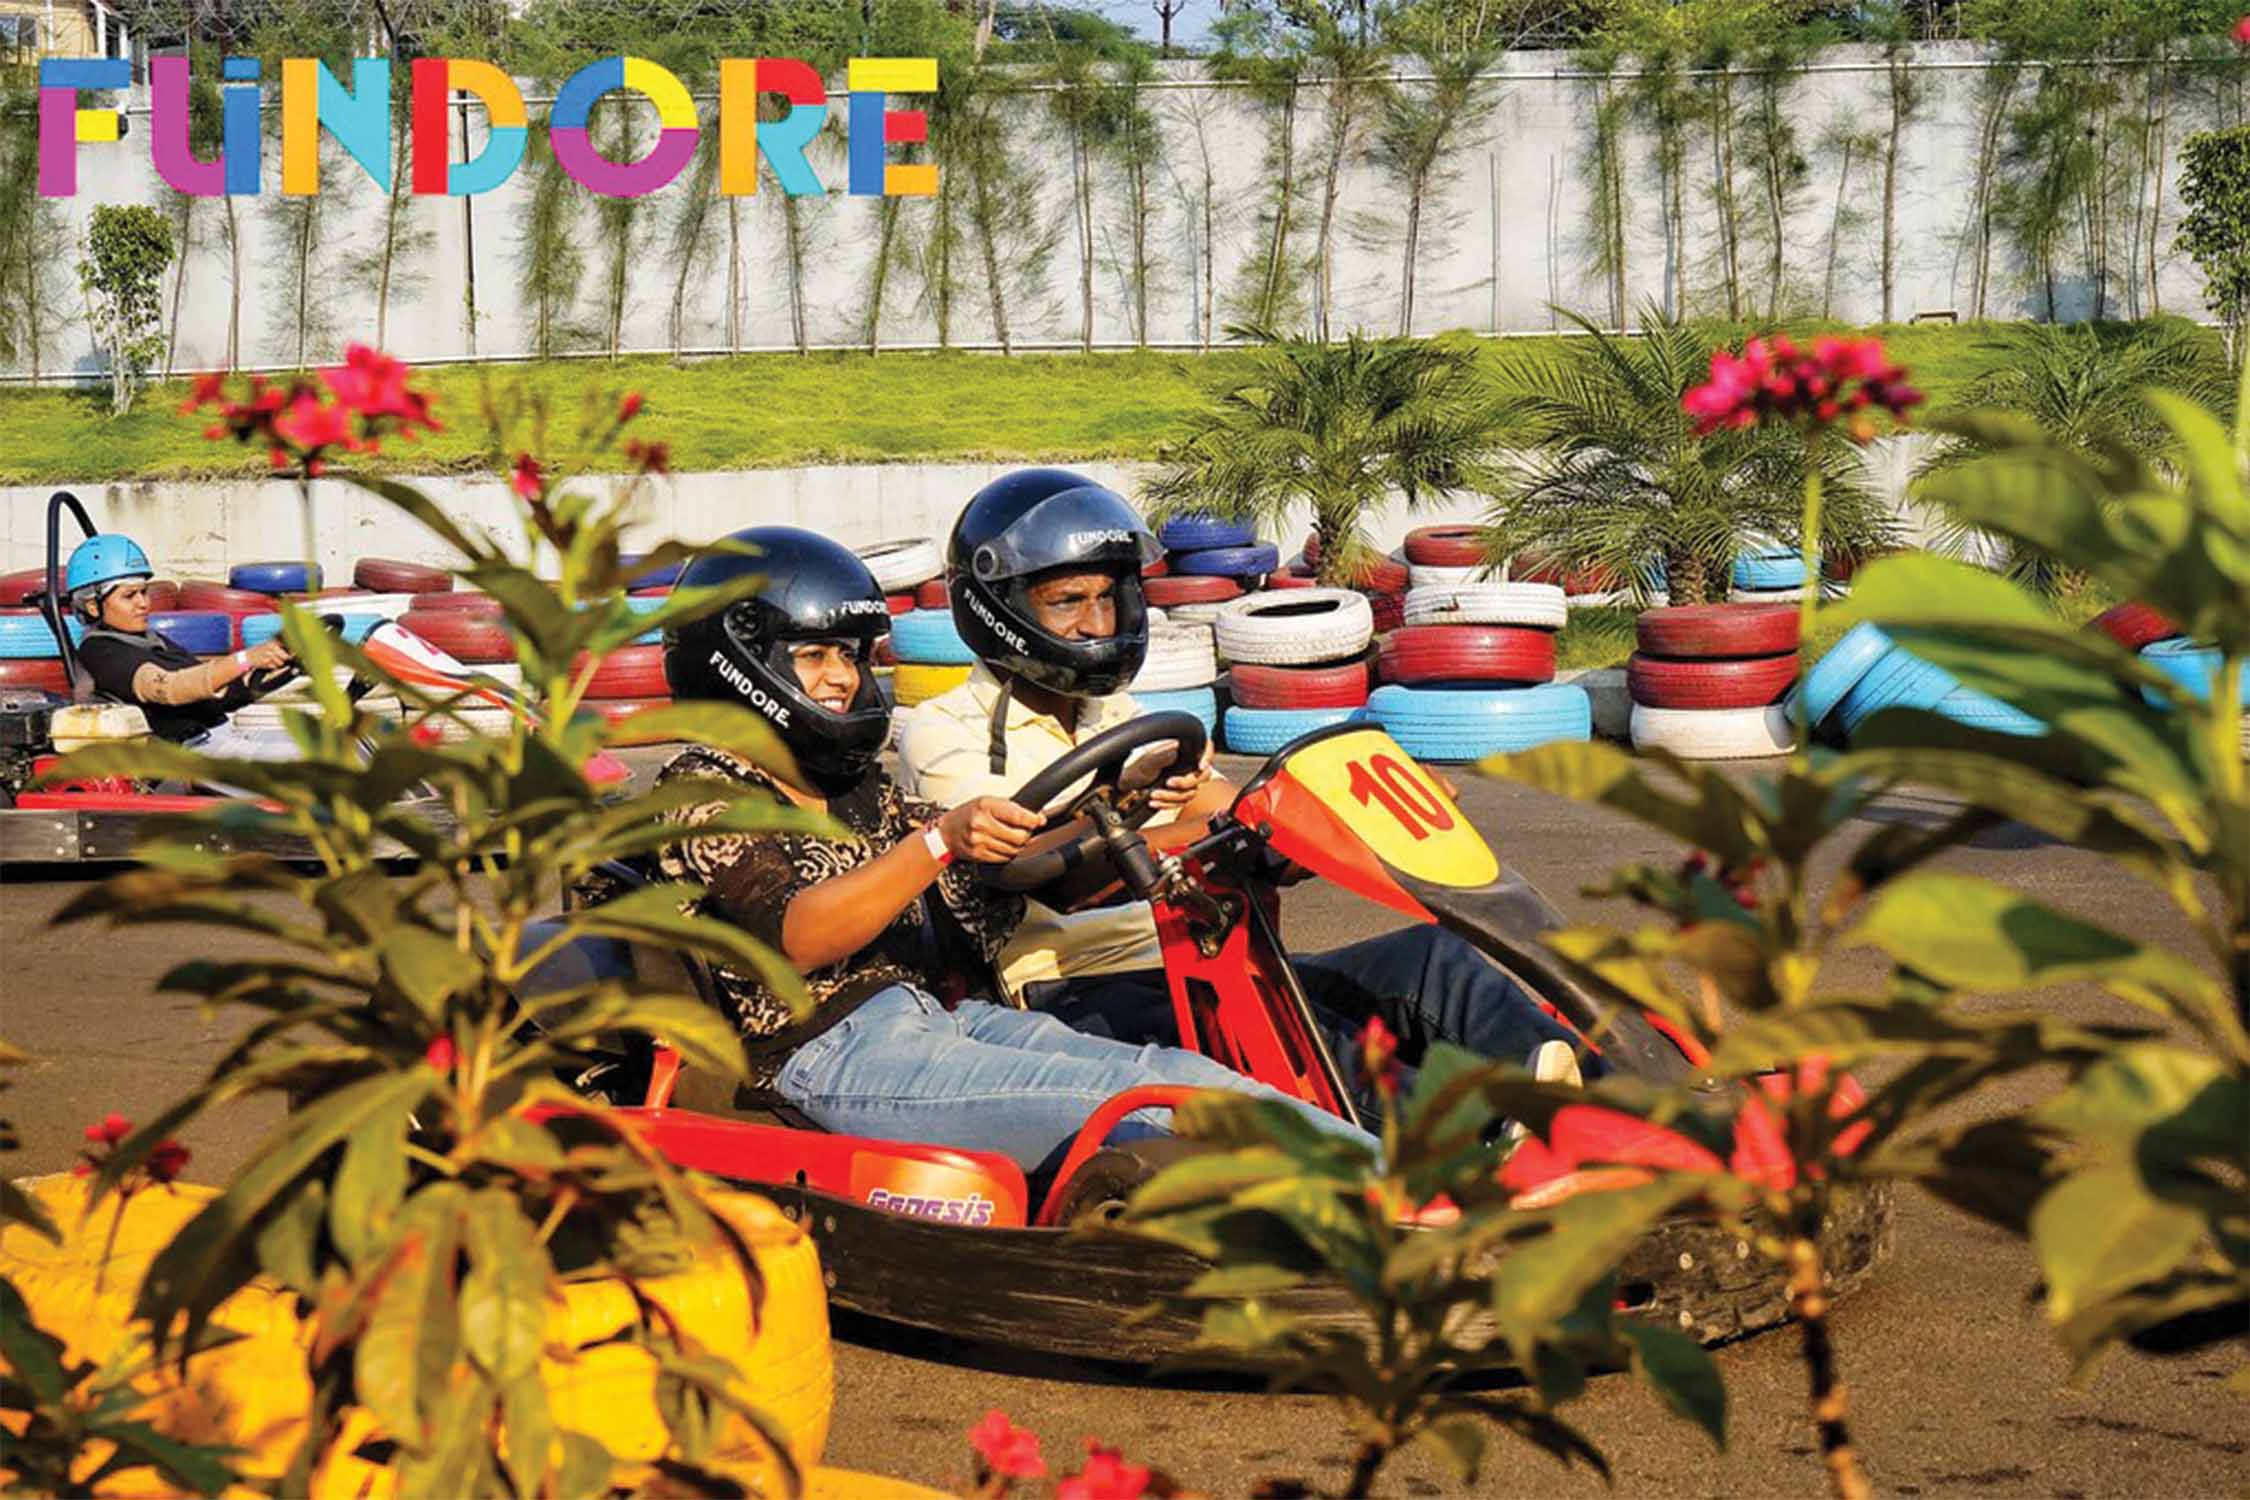 Go Karting in Indore